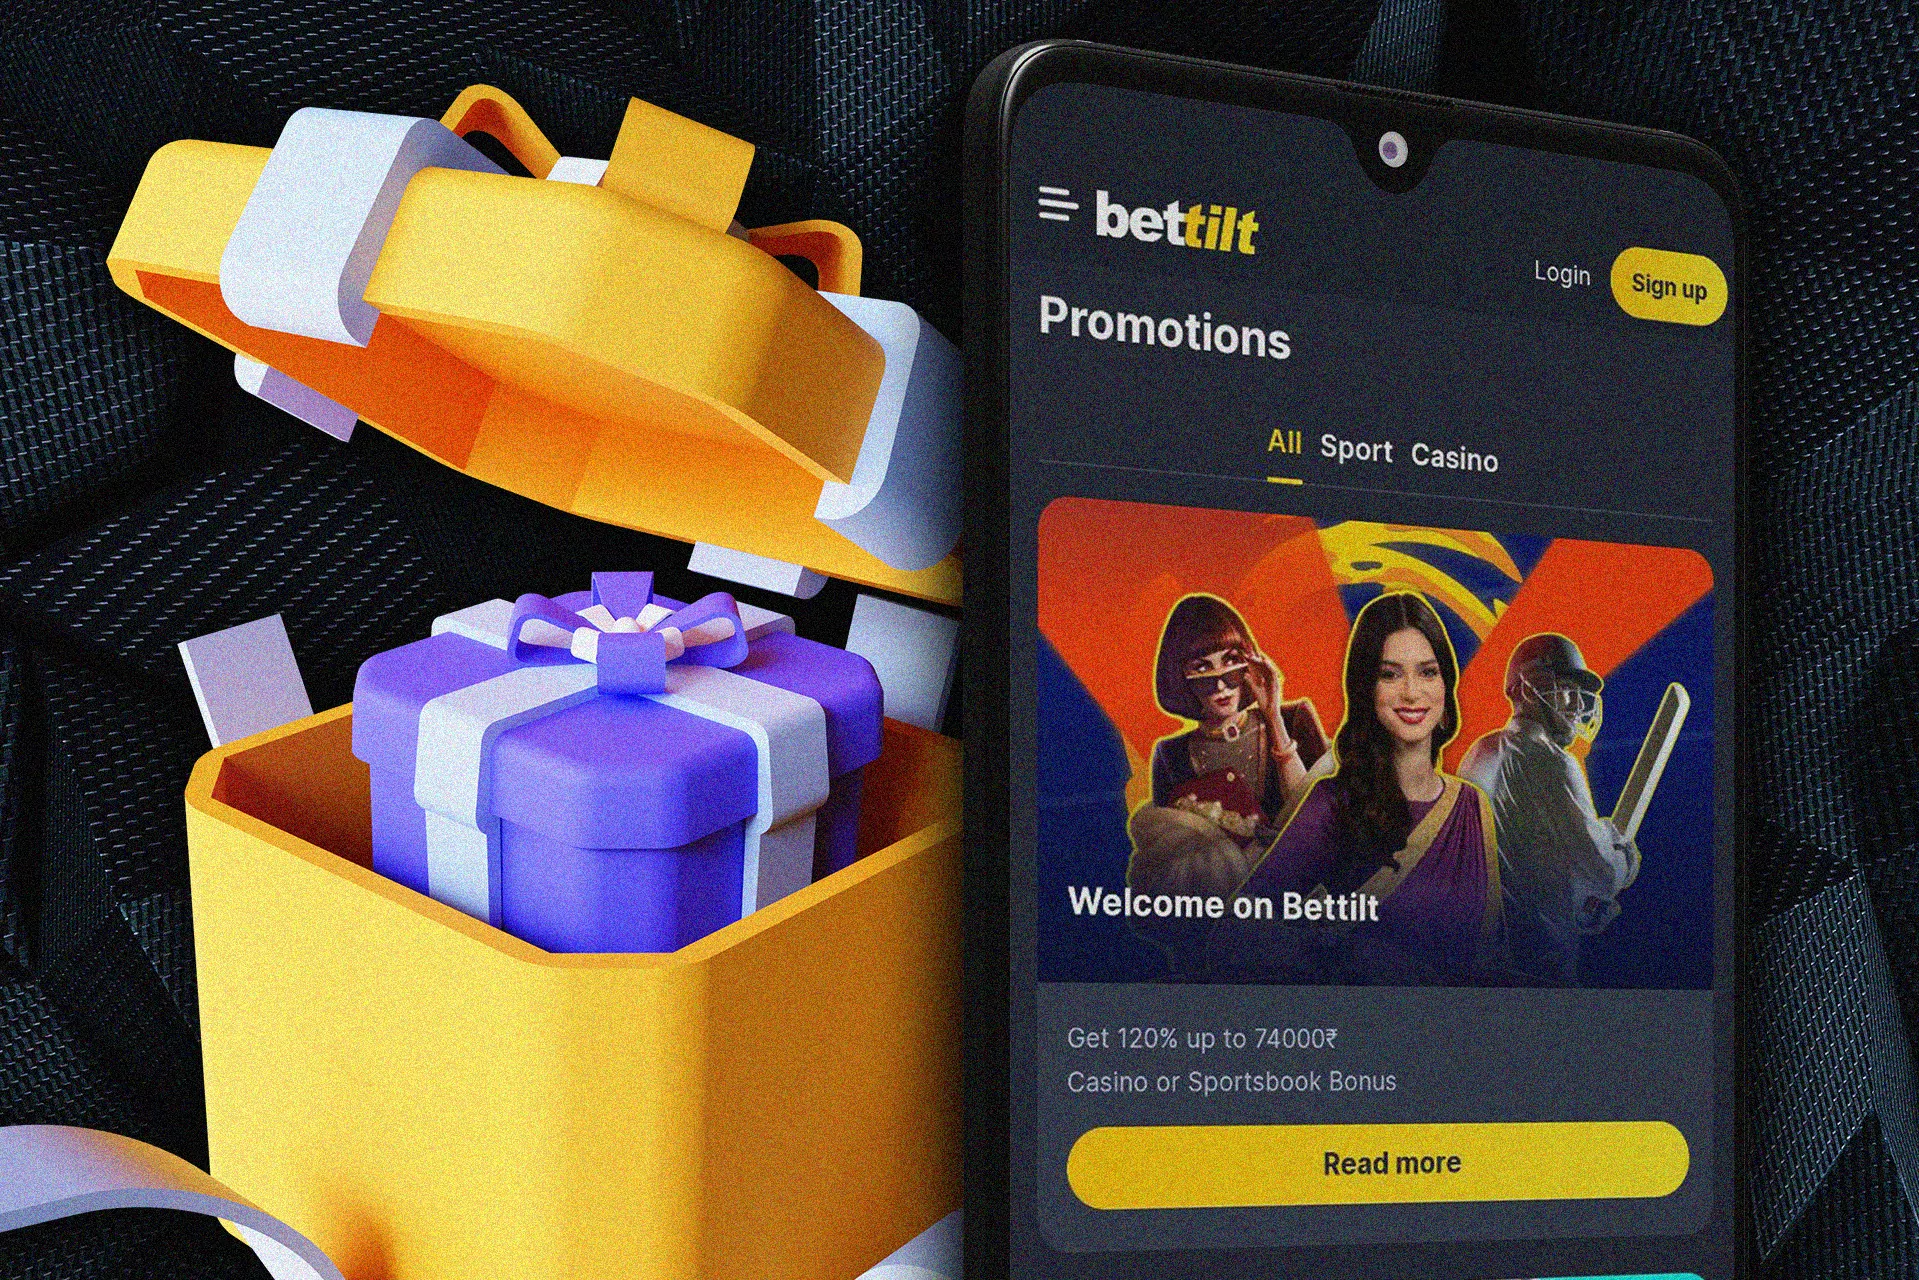 Promotions of Bettilt for all sports and casino.